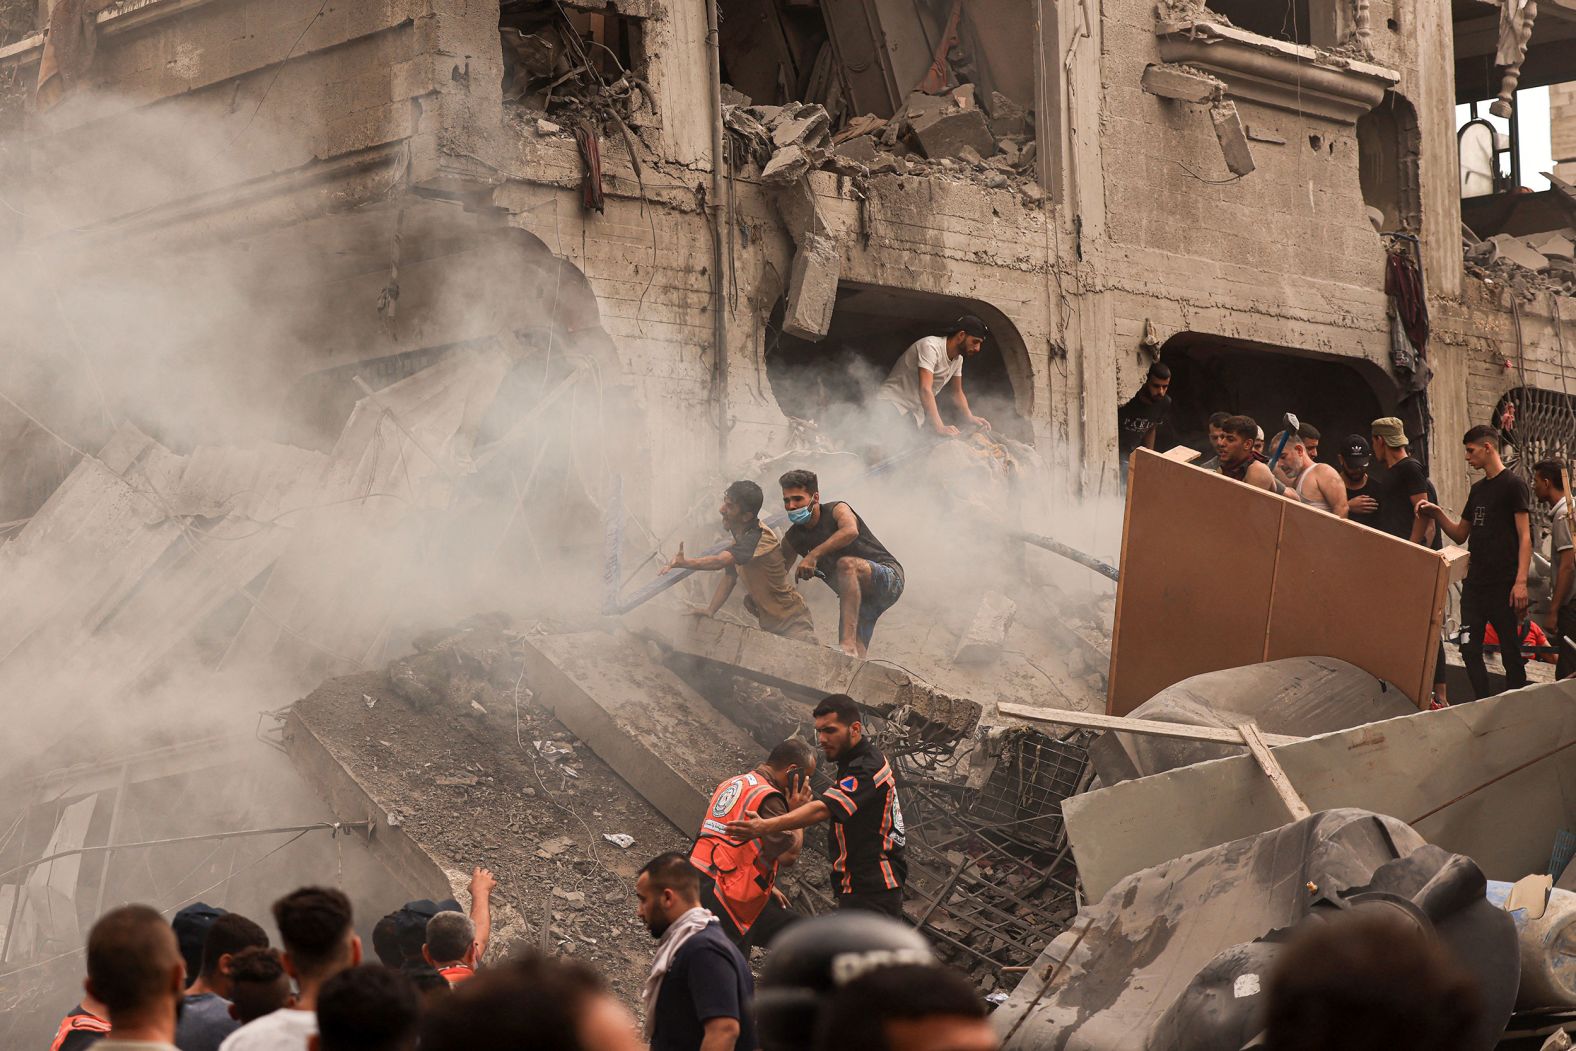 Palestinians search for survivors after an Israeli airstrike at the Jabalia refugee camp in Gaza City on Monday, October 9.